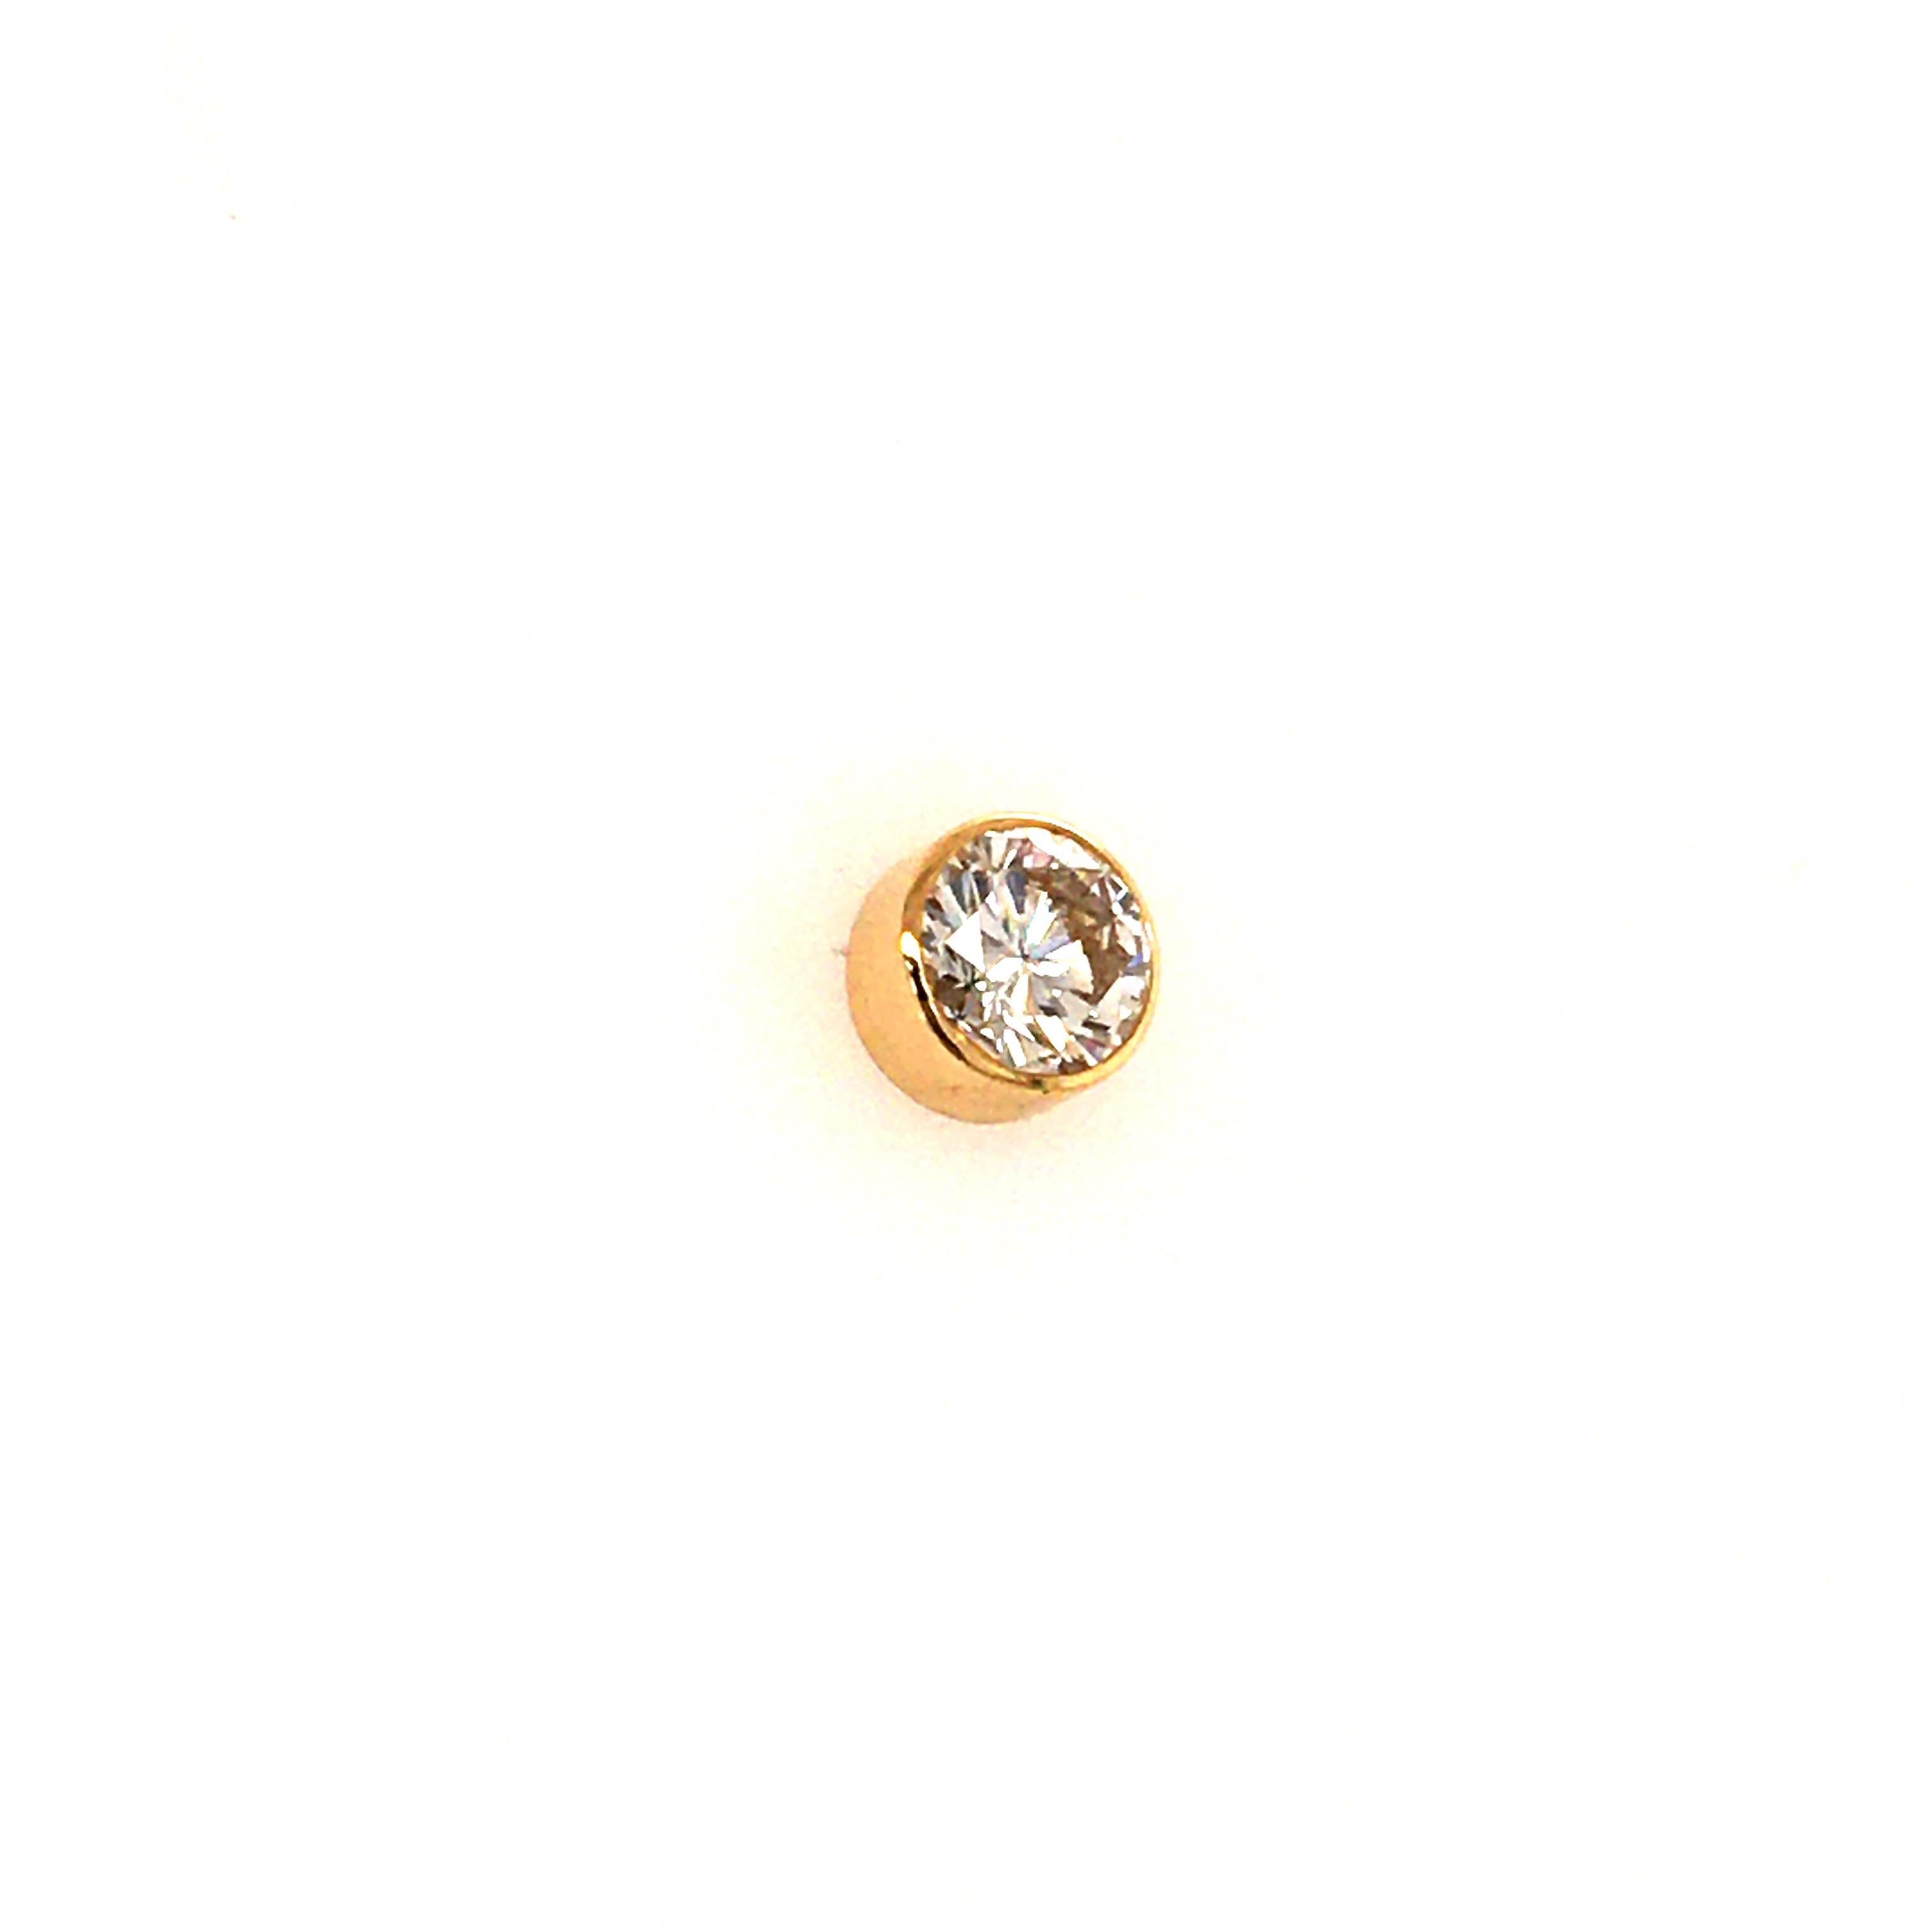 Women's or Men's Spectacular Day and Night Diamond Earstuds/Earrings in 18 Karat Yellow Gold